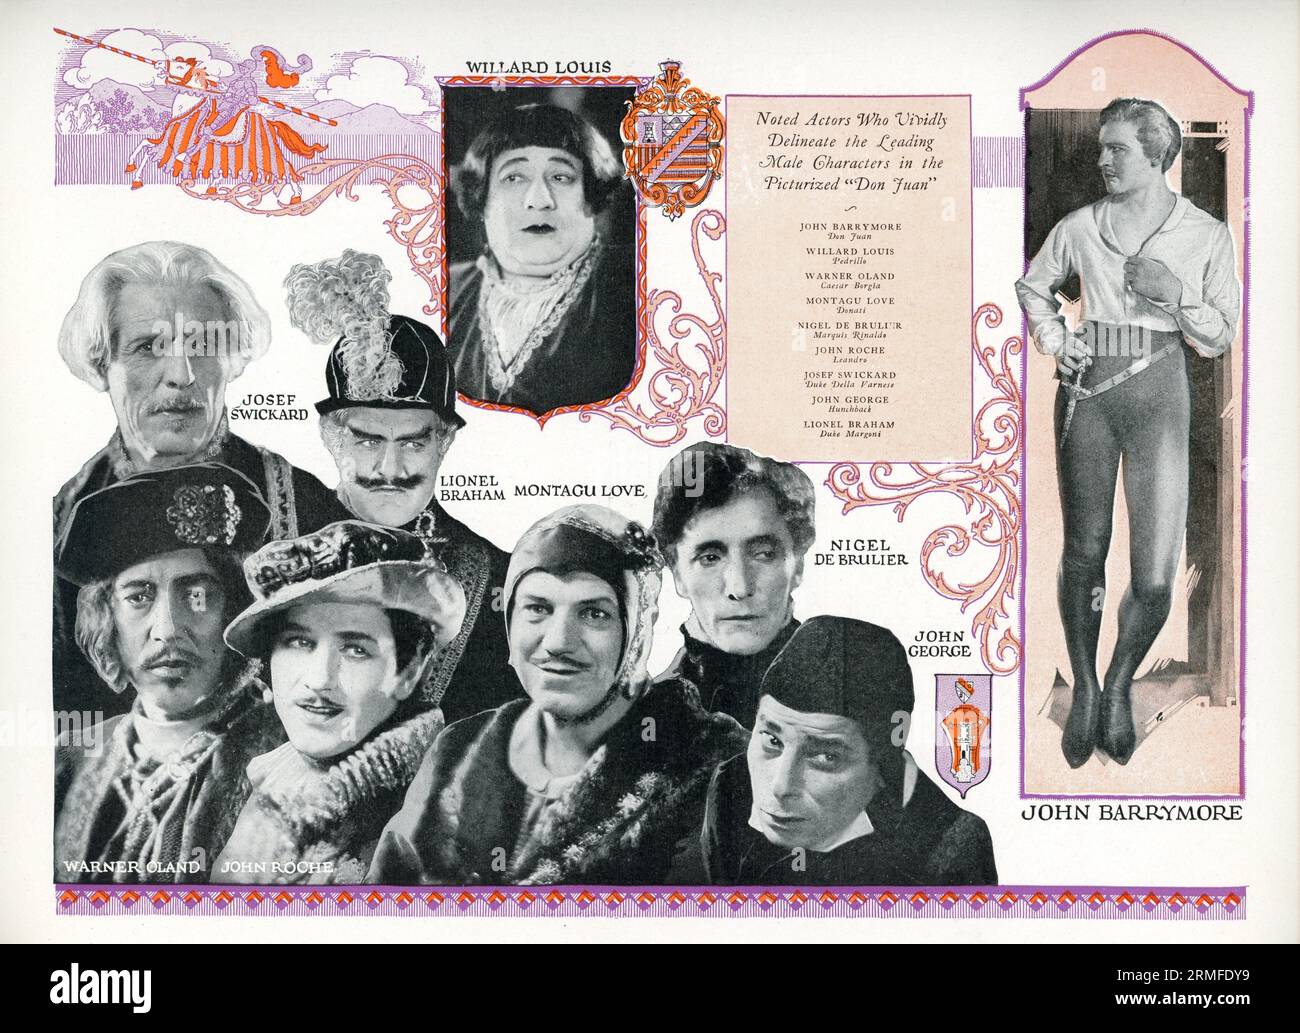 Actors WILLARD LOUIS JOSEF SWICKARD LIONEL BRAHAM WARNER OLAND JOHN ROCHE MONTAGUE LOVE NIGEL DE BRULIER and JOHN GEORGE appearing with JOHN BARRYMORE as DON JUAN 1926 director ALAN CROSLAND screenplay Bess Meredyth Silent Movie with Music and Sound Effects The Vitaphone Corporation / Warner Bros. Stock Photo